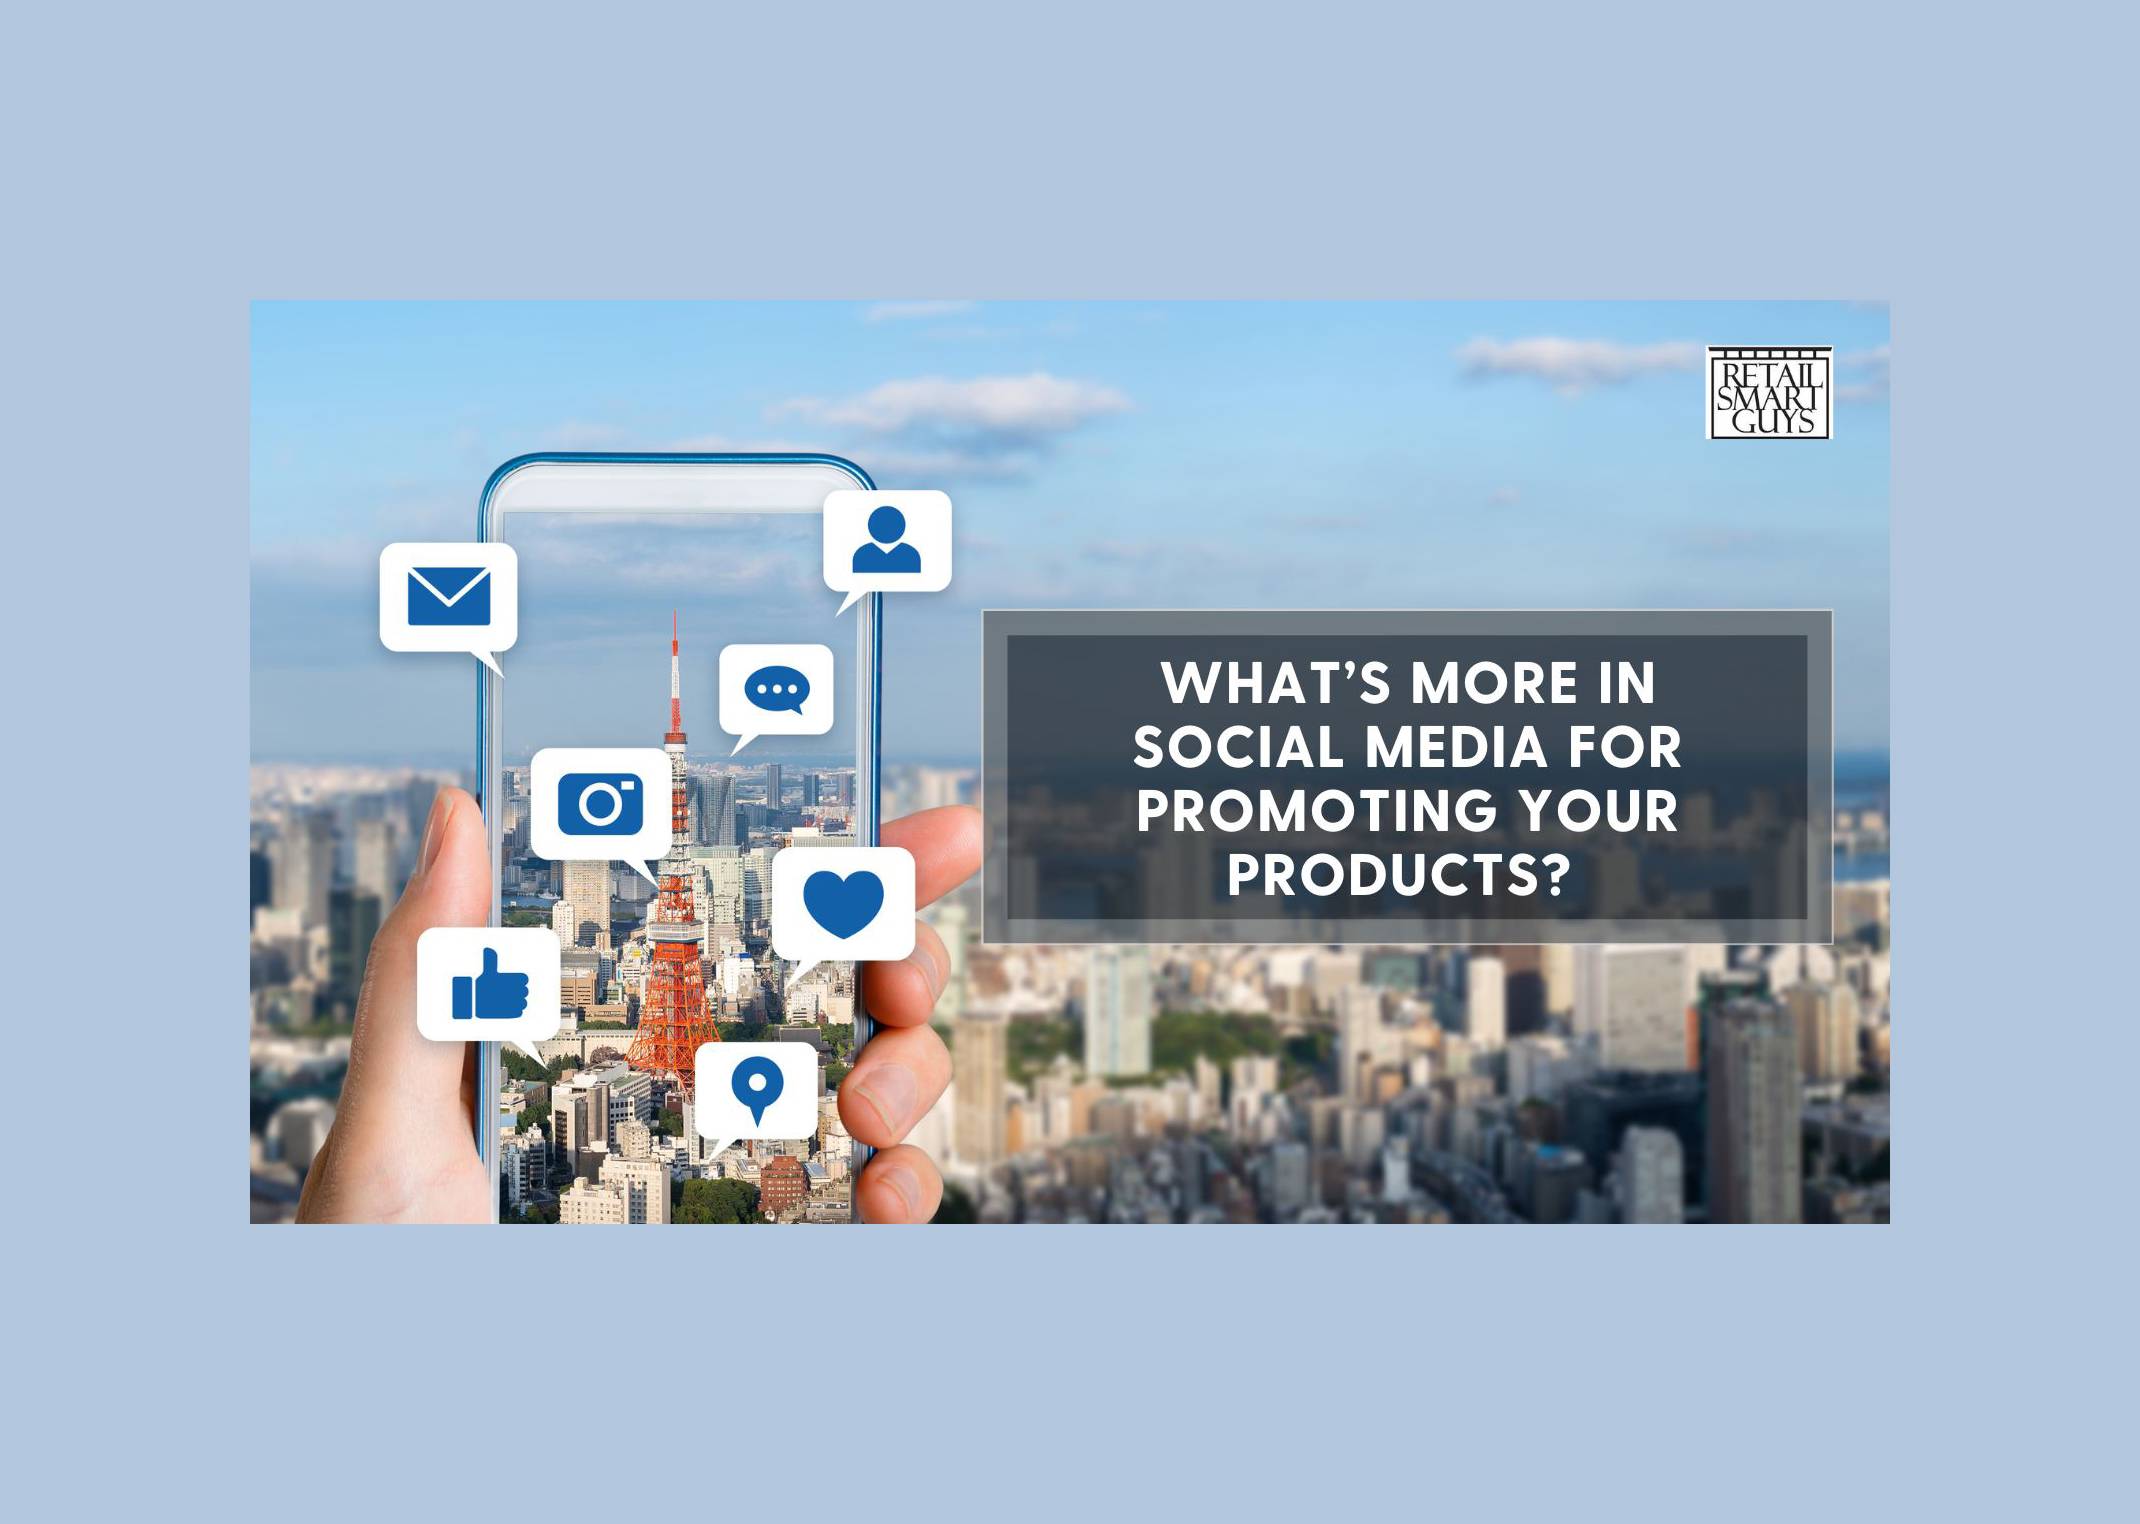 What’s more in social media for promoting your products?